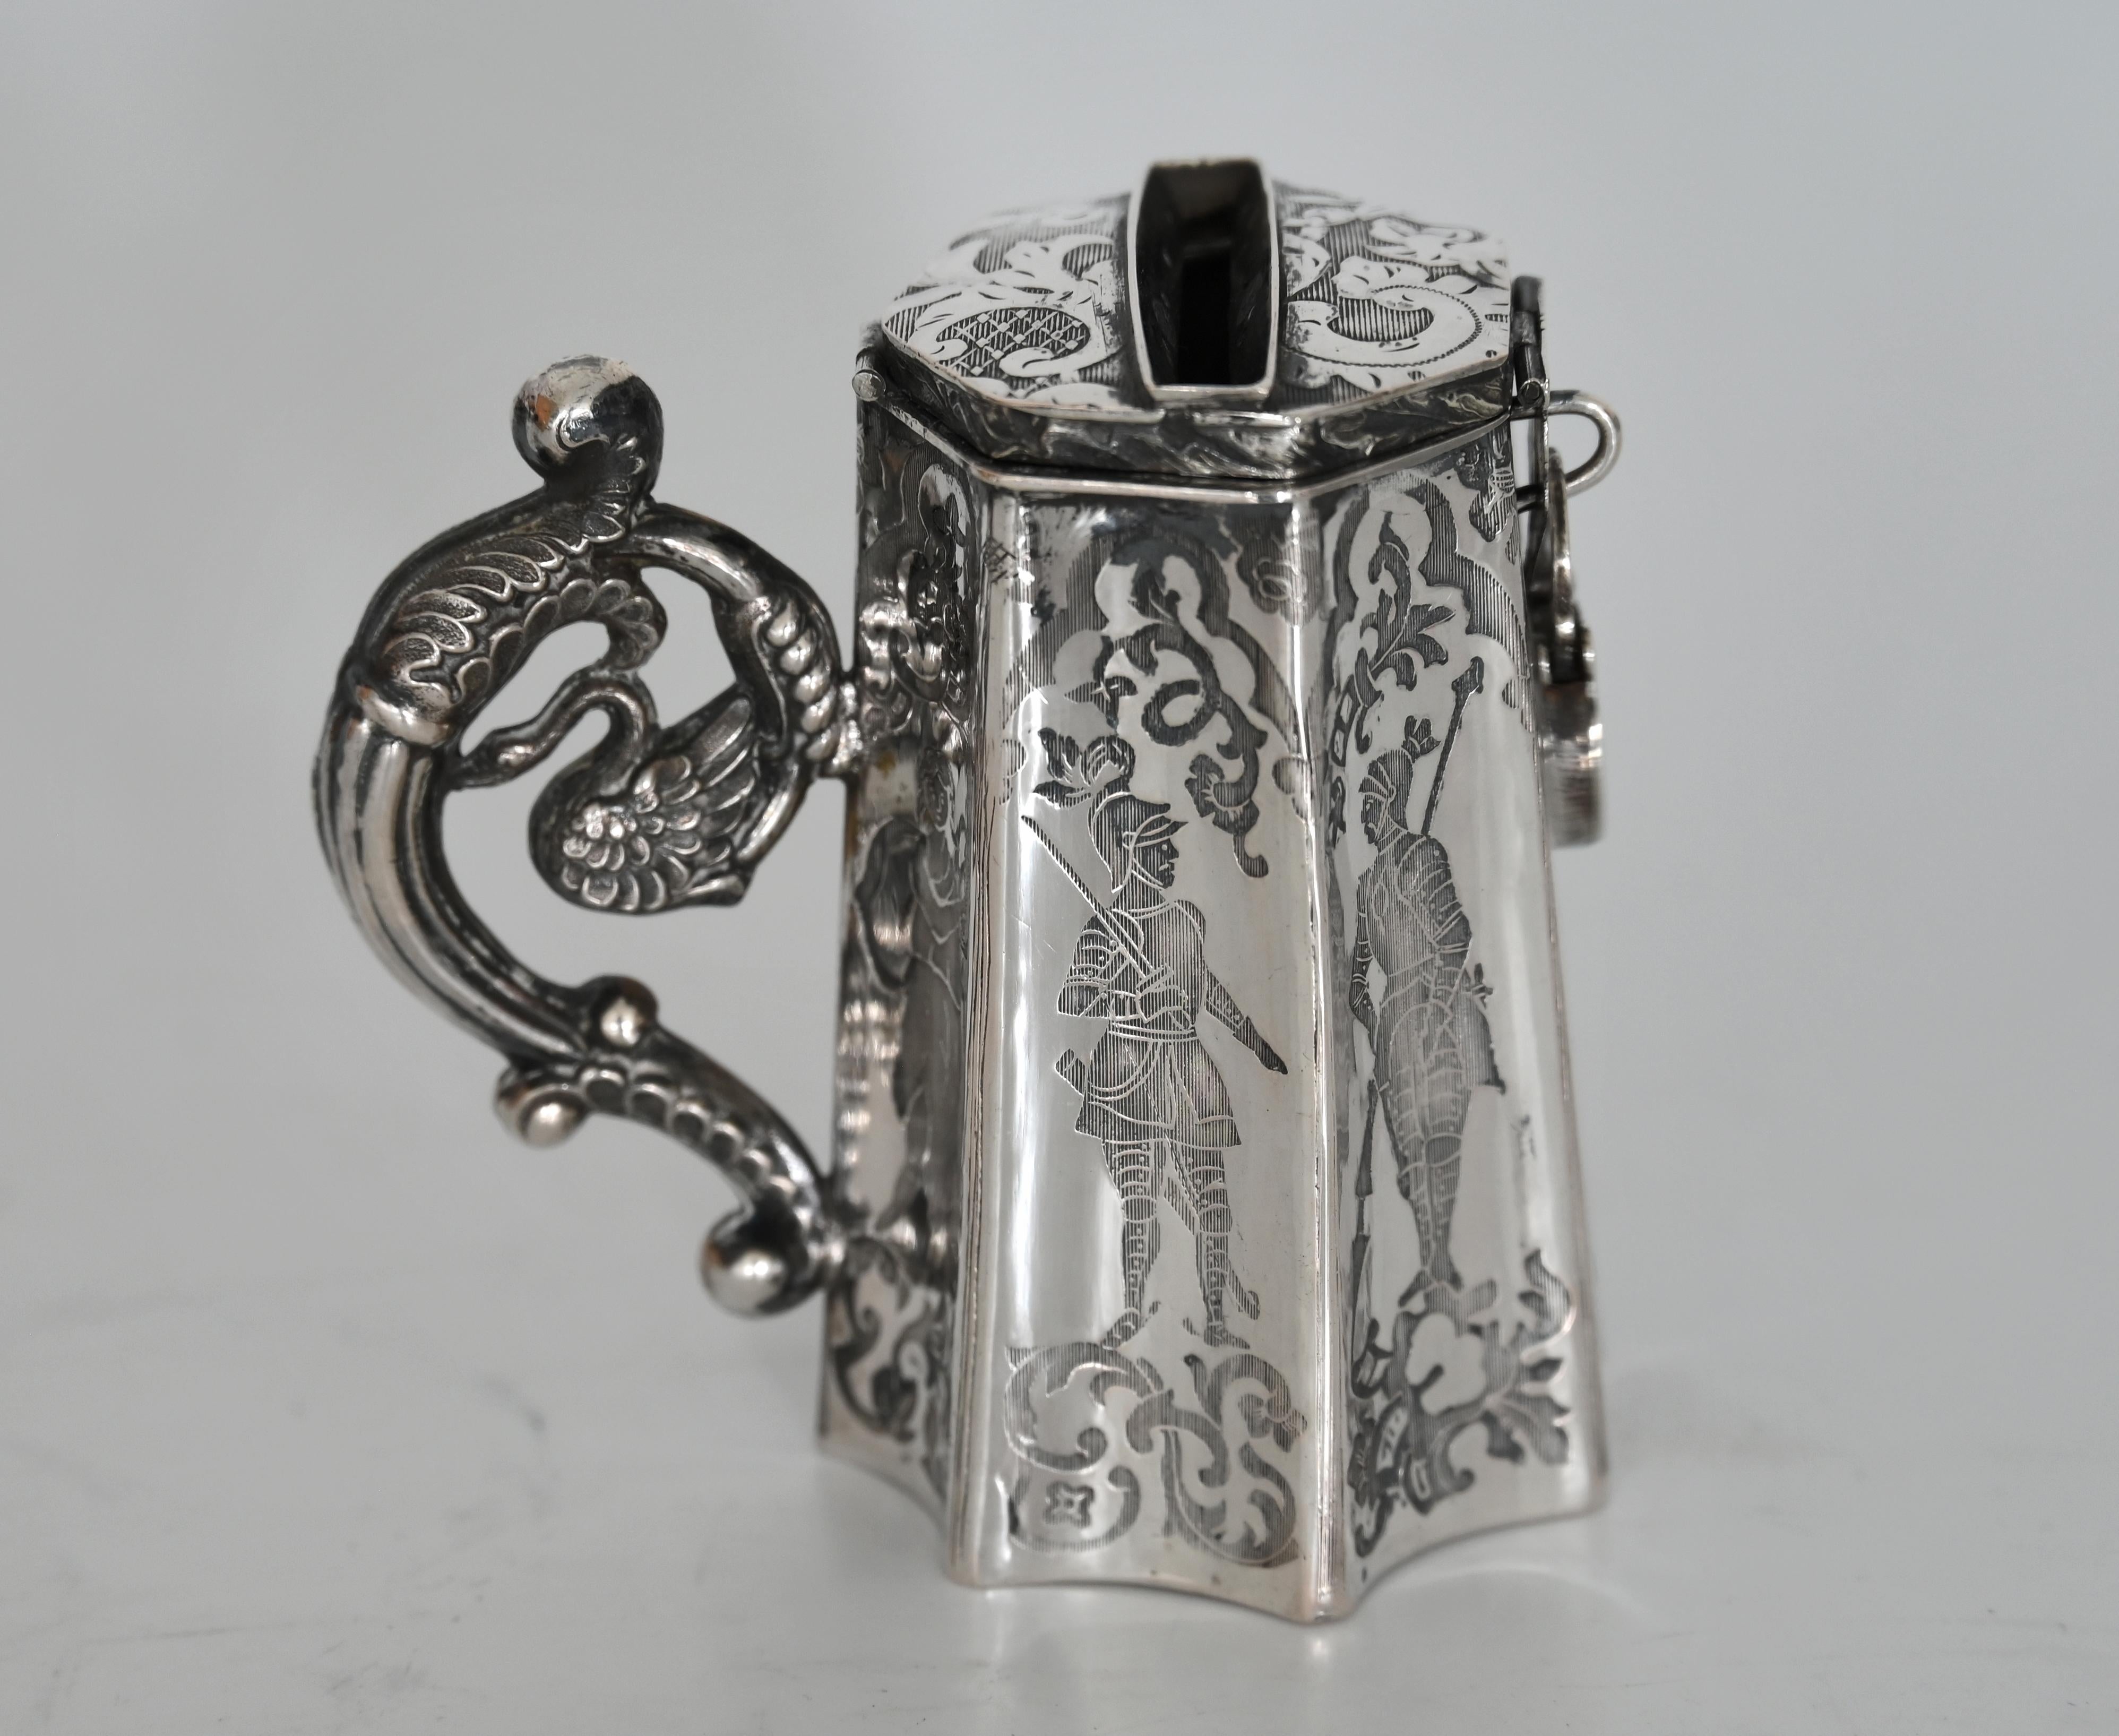 A rare money box from the Bidermeier period in silver with small lock that can be opened and closed without a key.
Very special is the fine engraving on the seven fields, which are beautifully elaborated with knights and a lady. The handle is